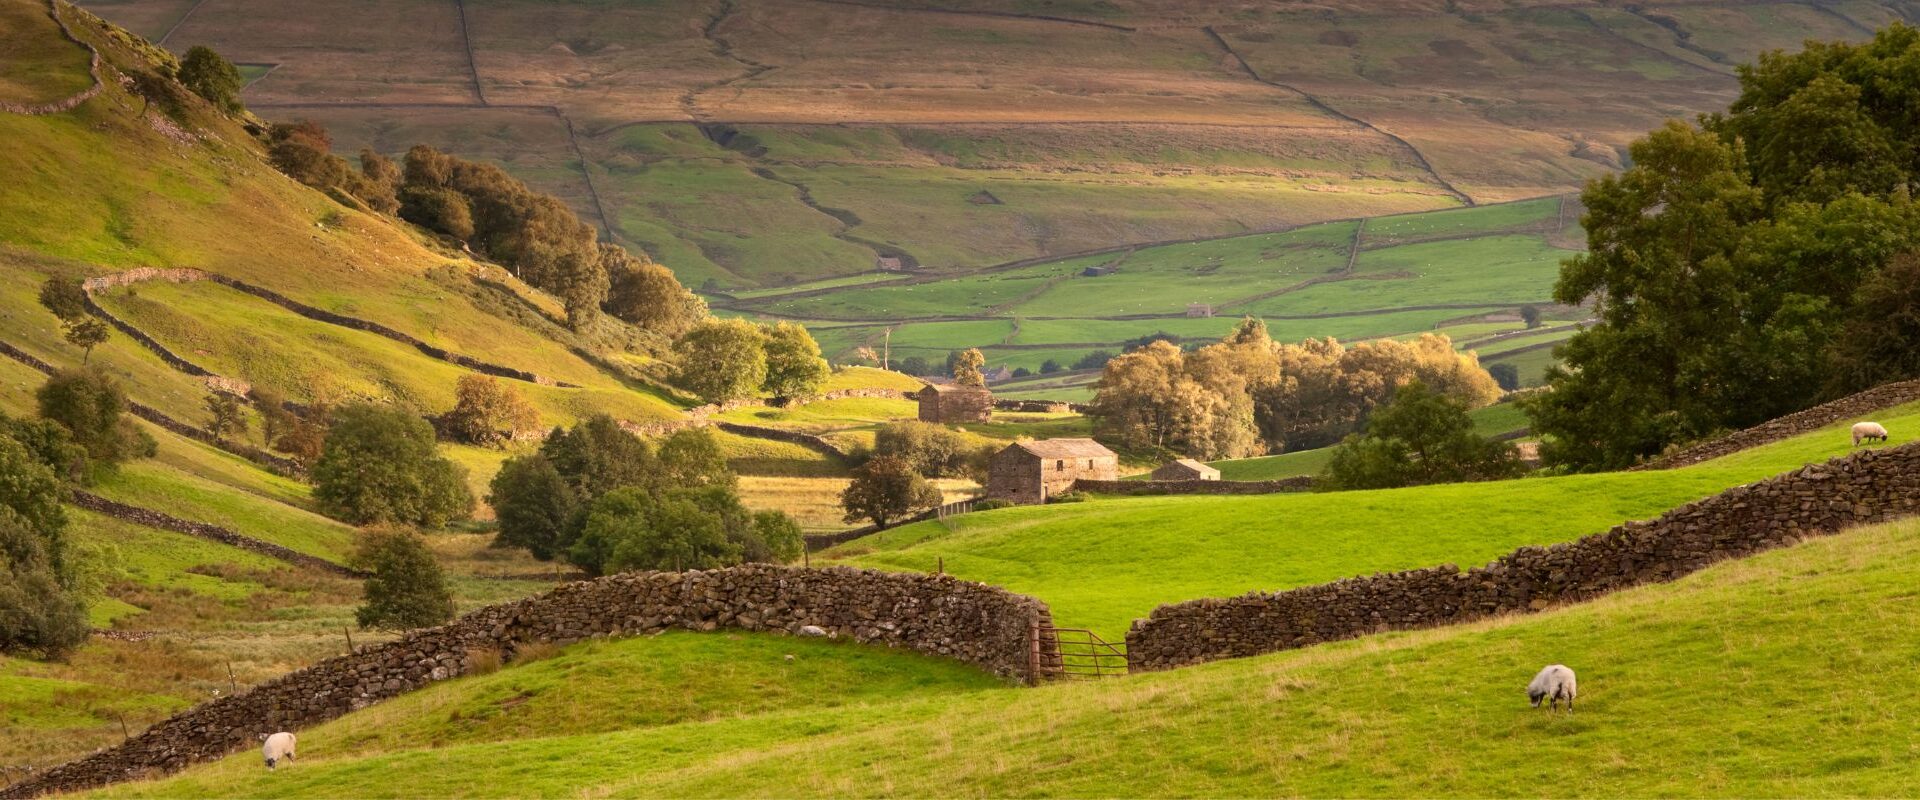 Holiday Cottages in Yorkshire